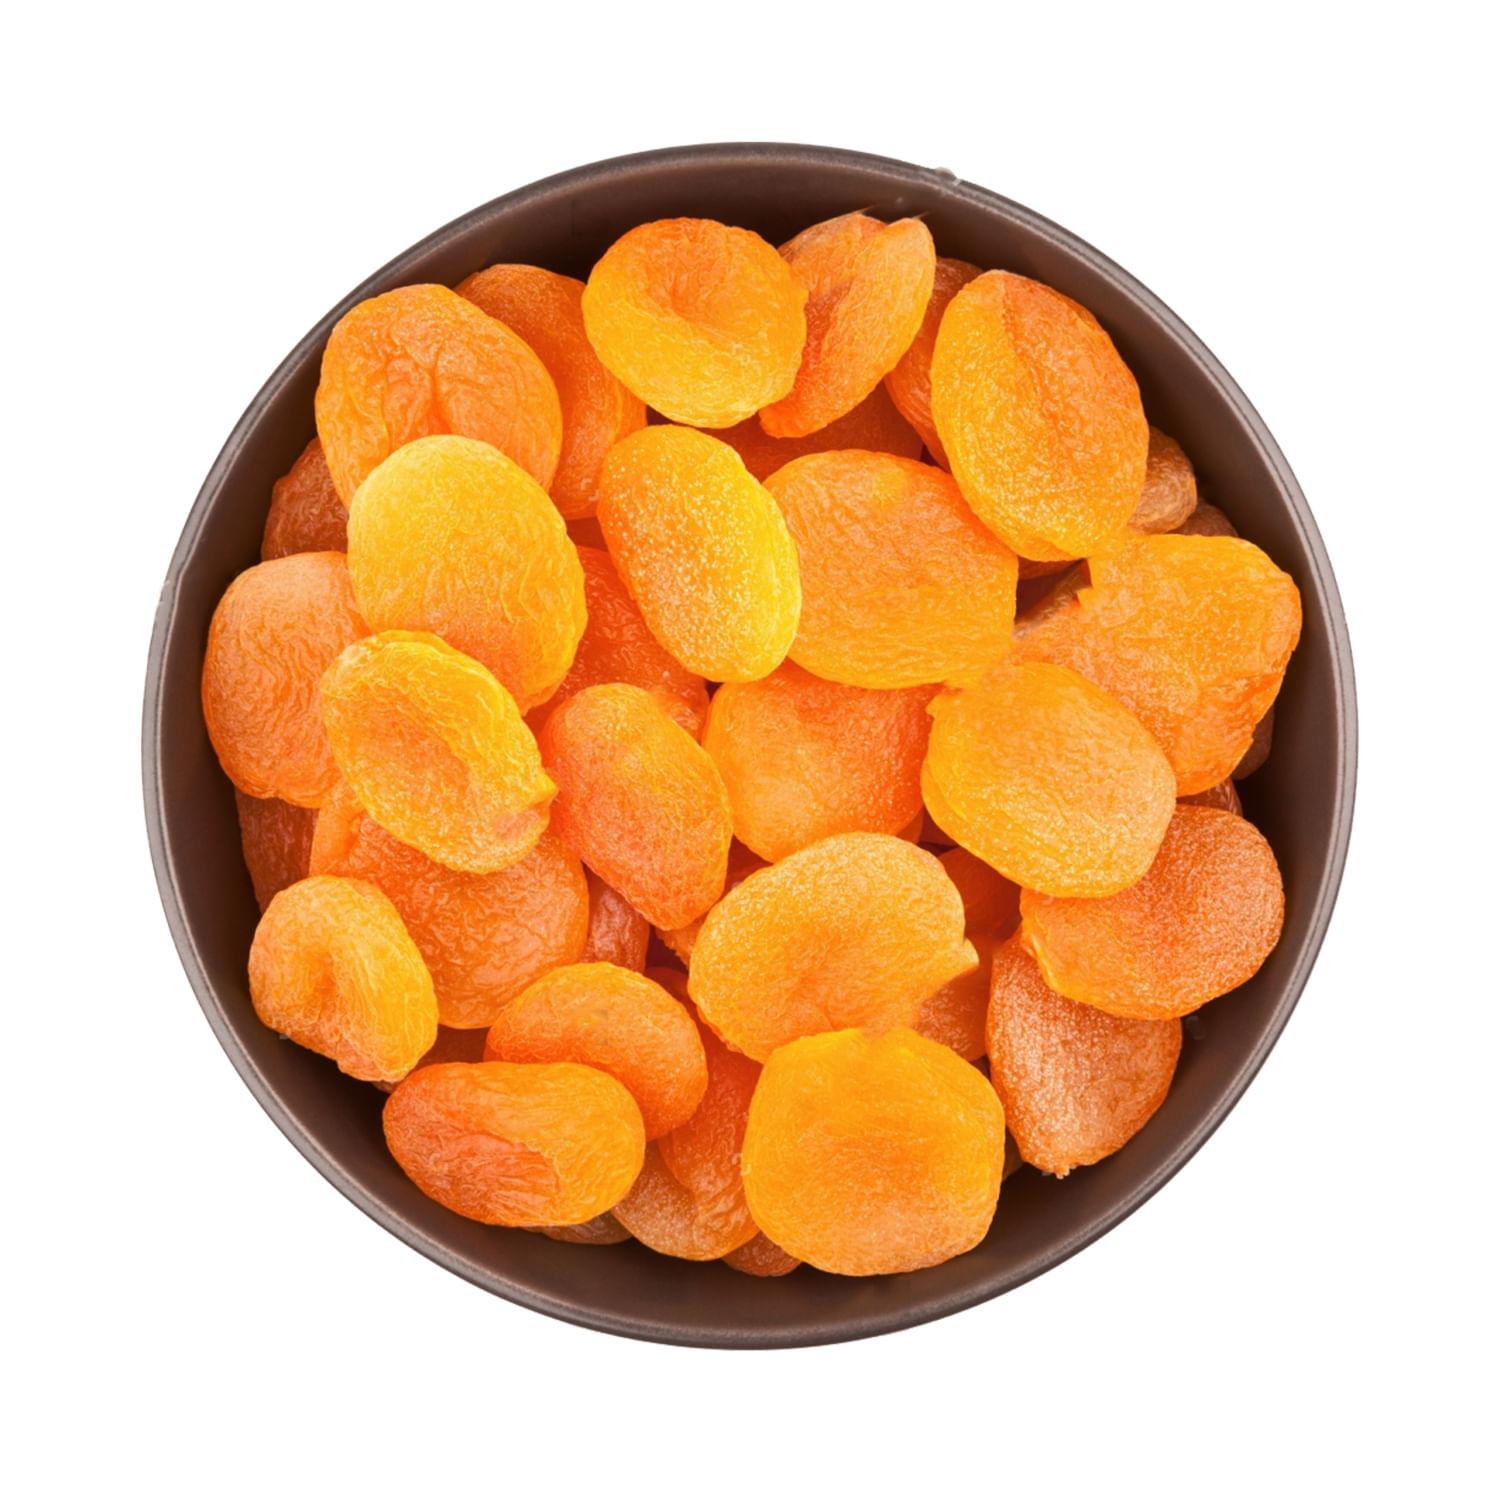 Nutraj Premium Dried Pitted Turkish Apricots 200g Tray